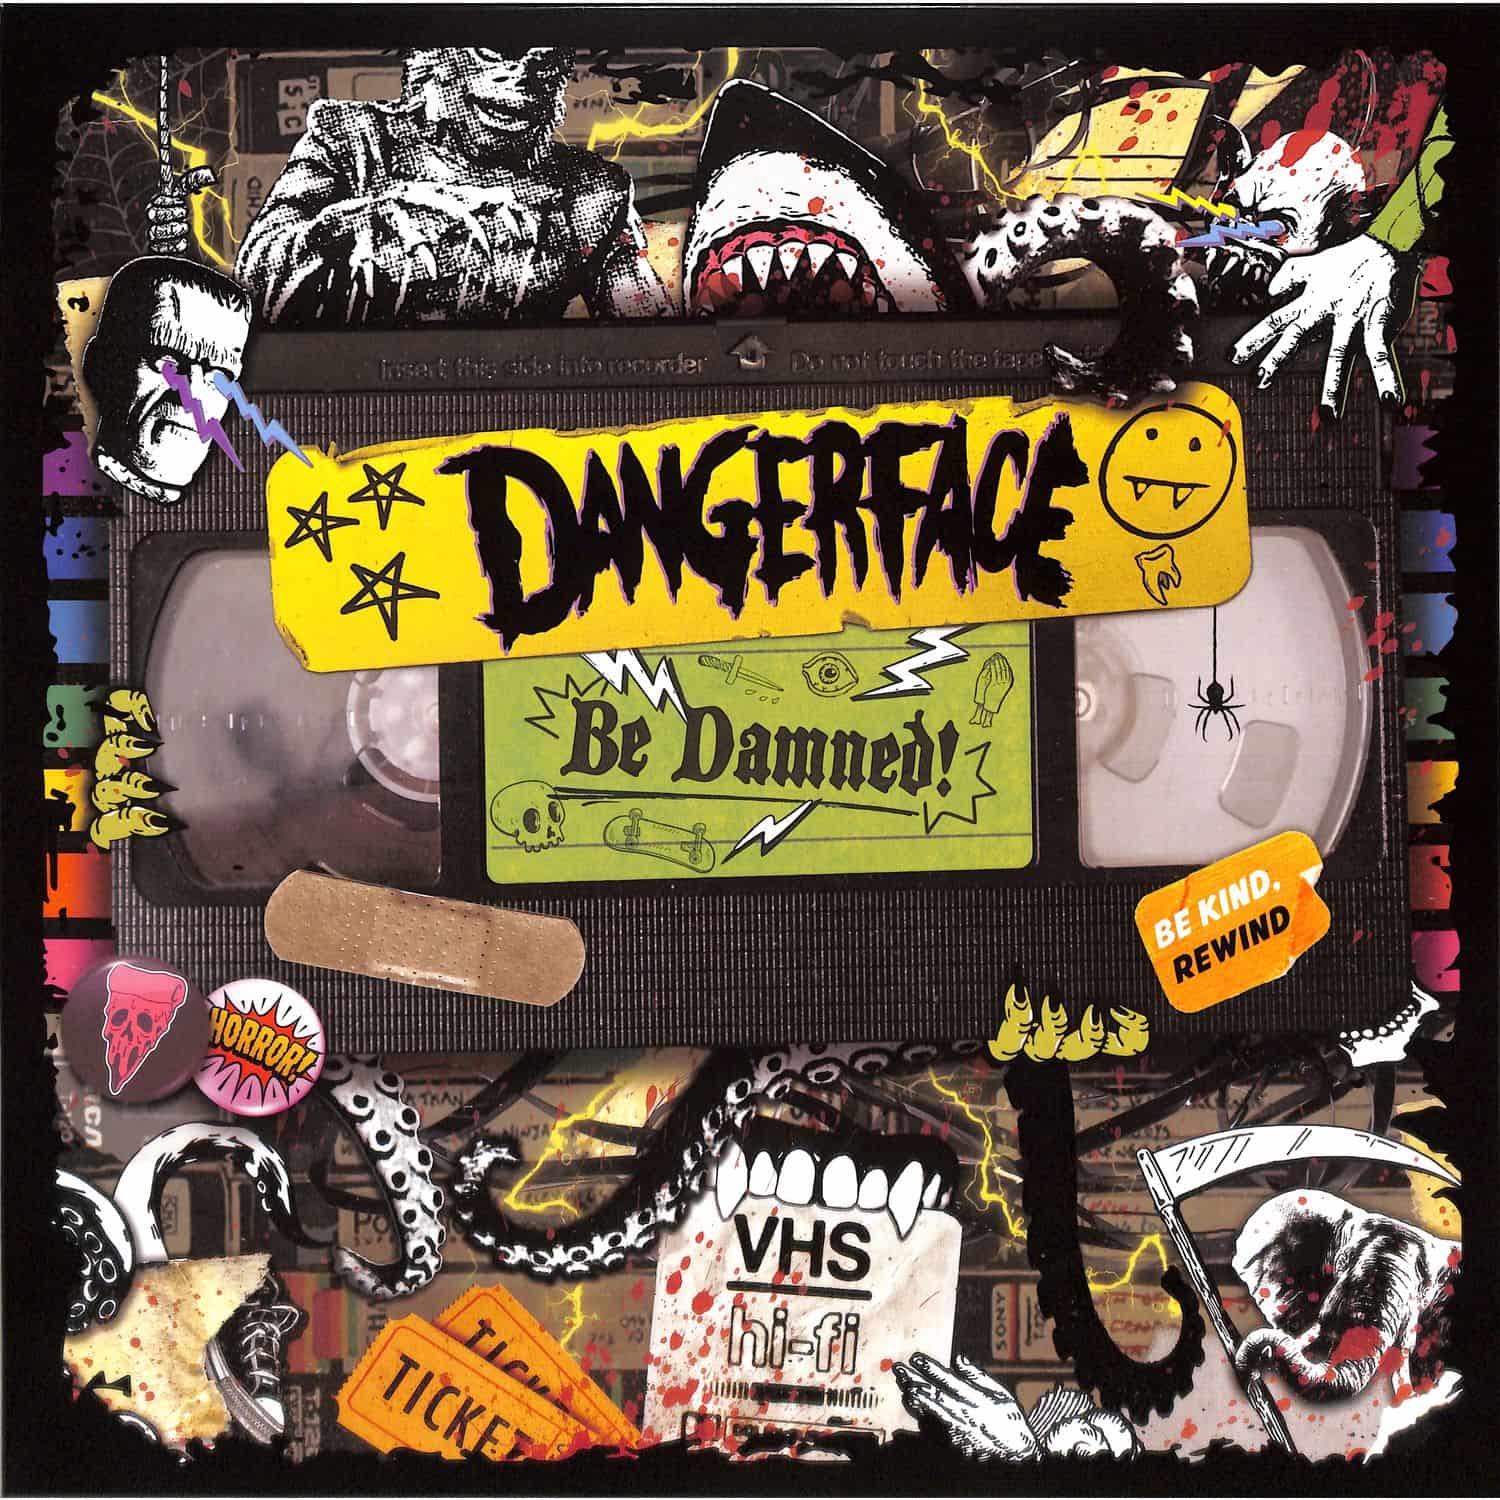 Dangerface - BE DAMNED! 